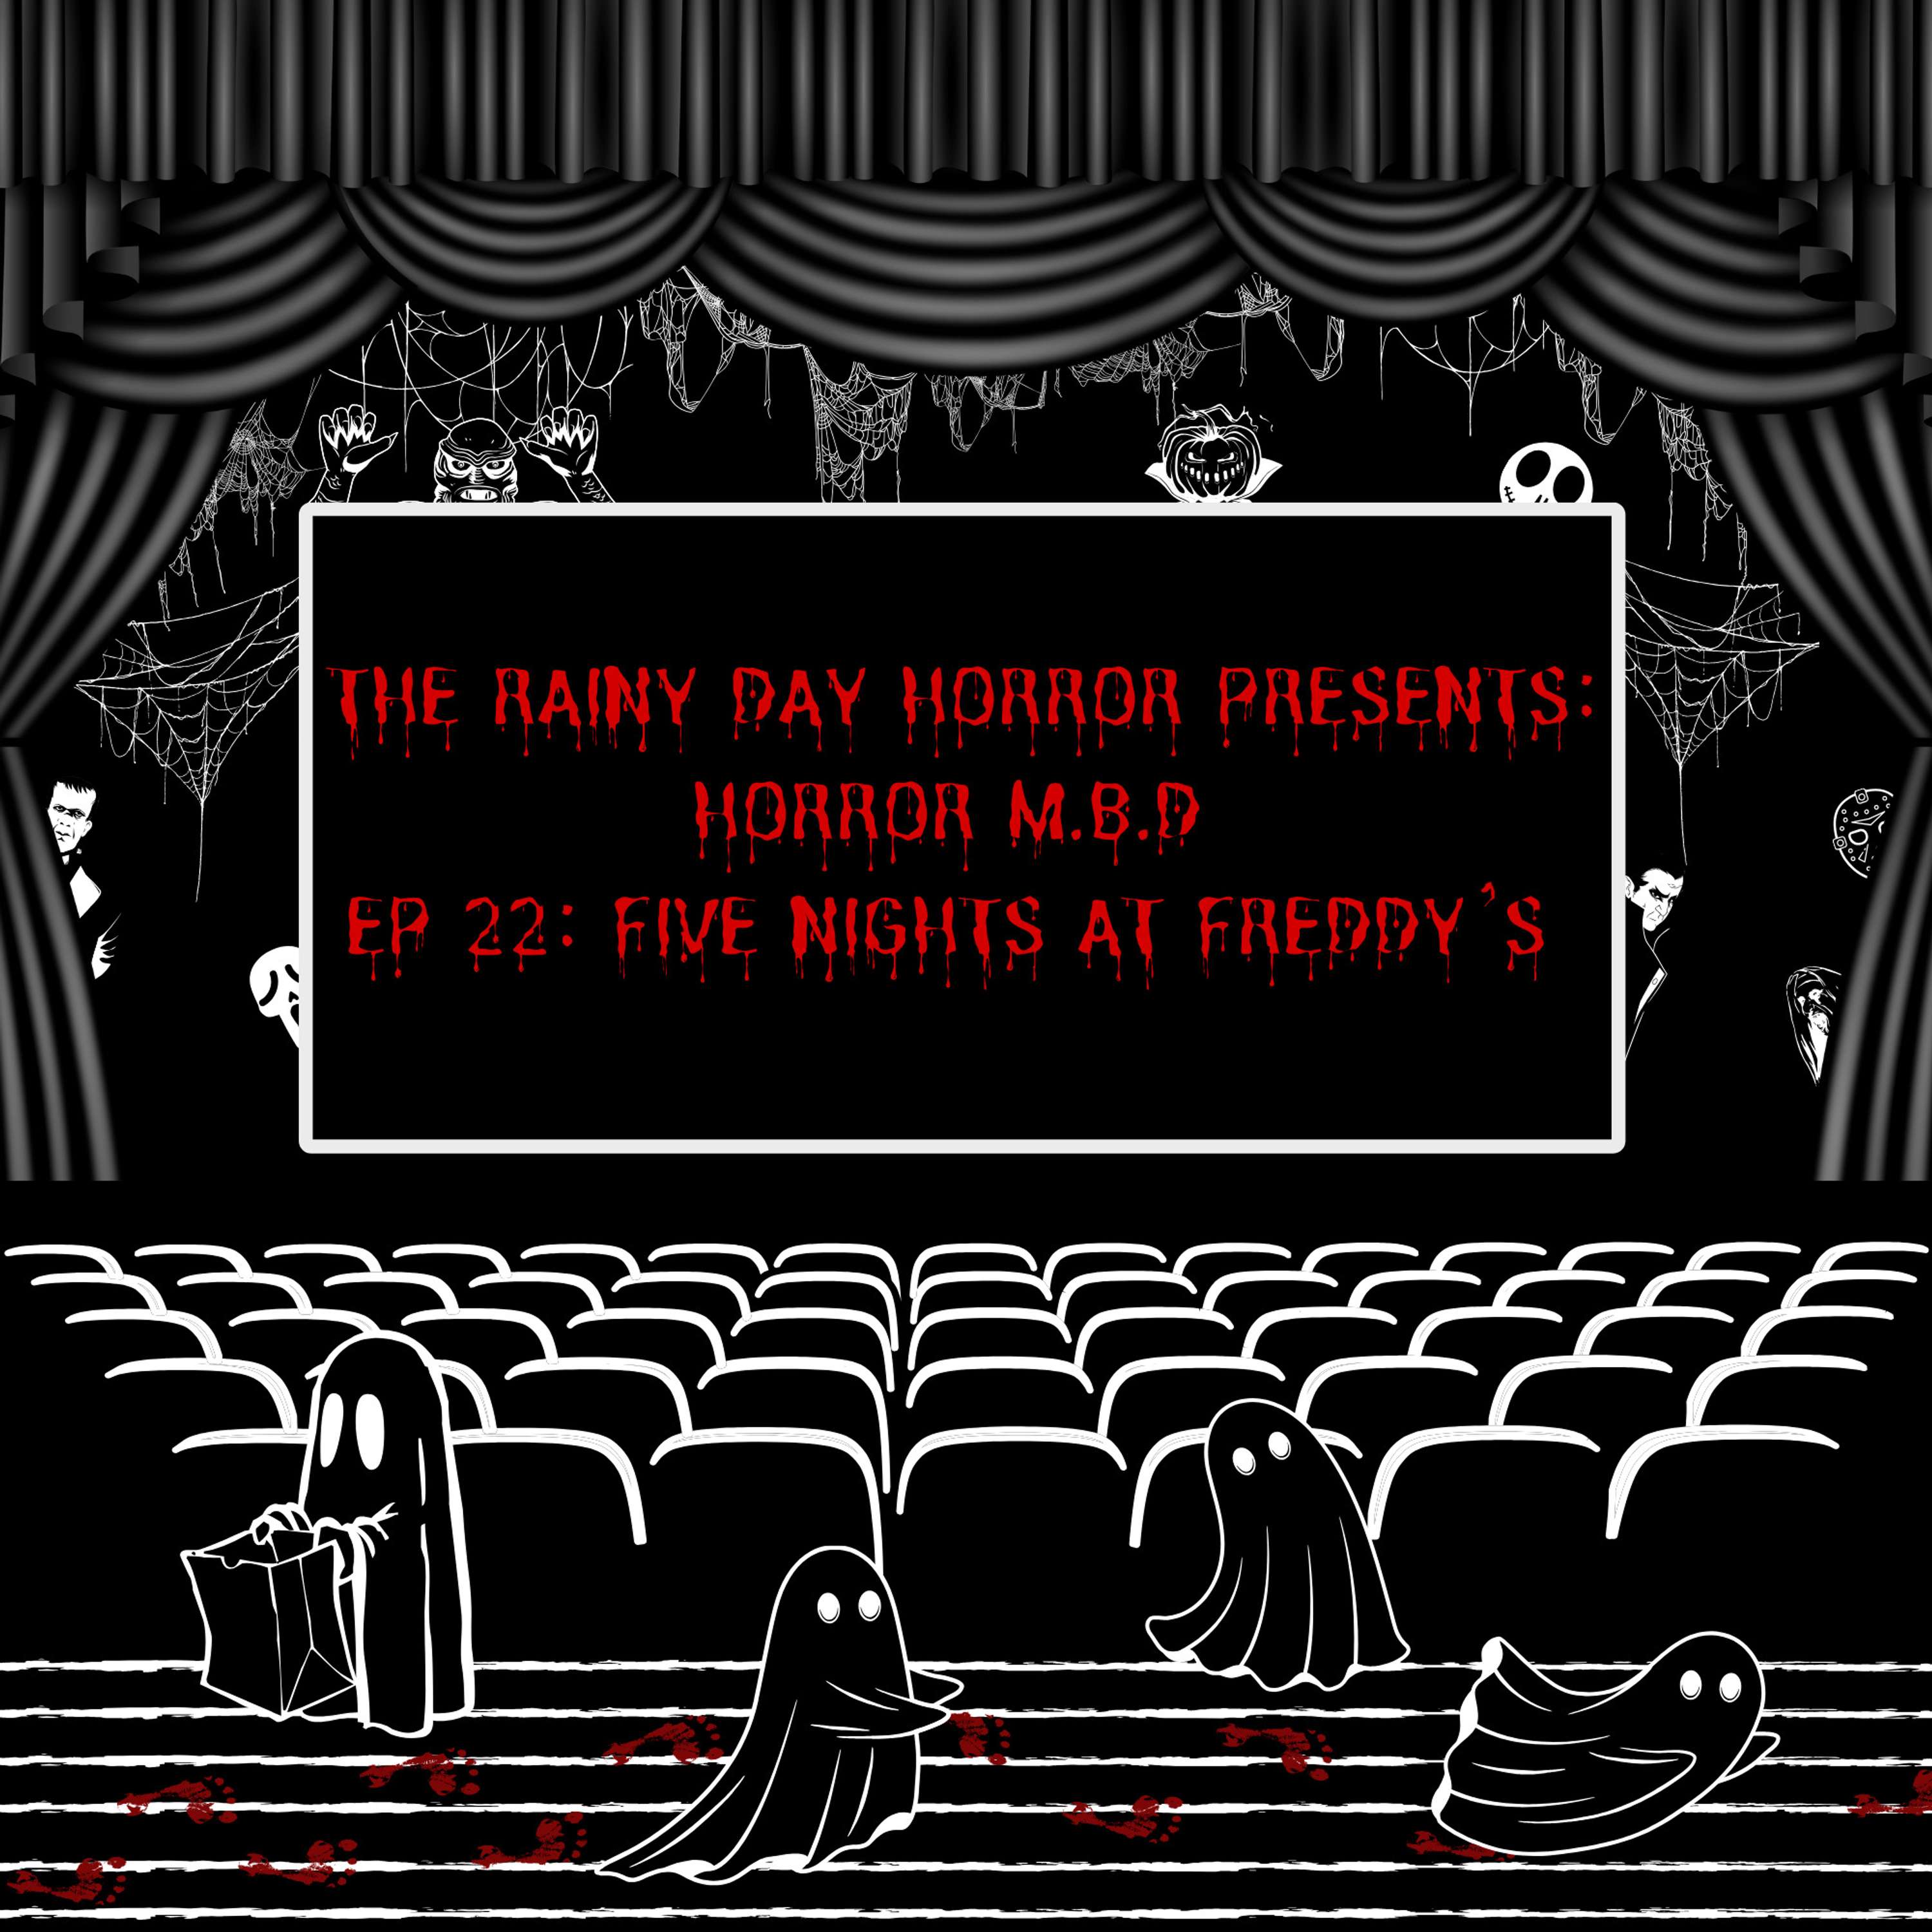 Horror M.B.D. Ep 23: Five Nights At Freddy's